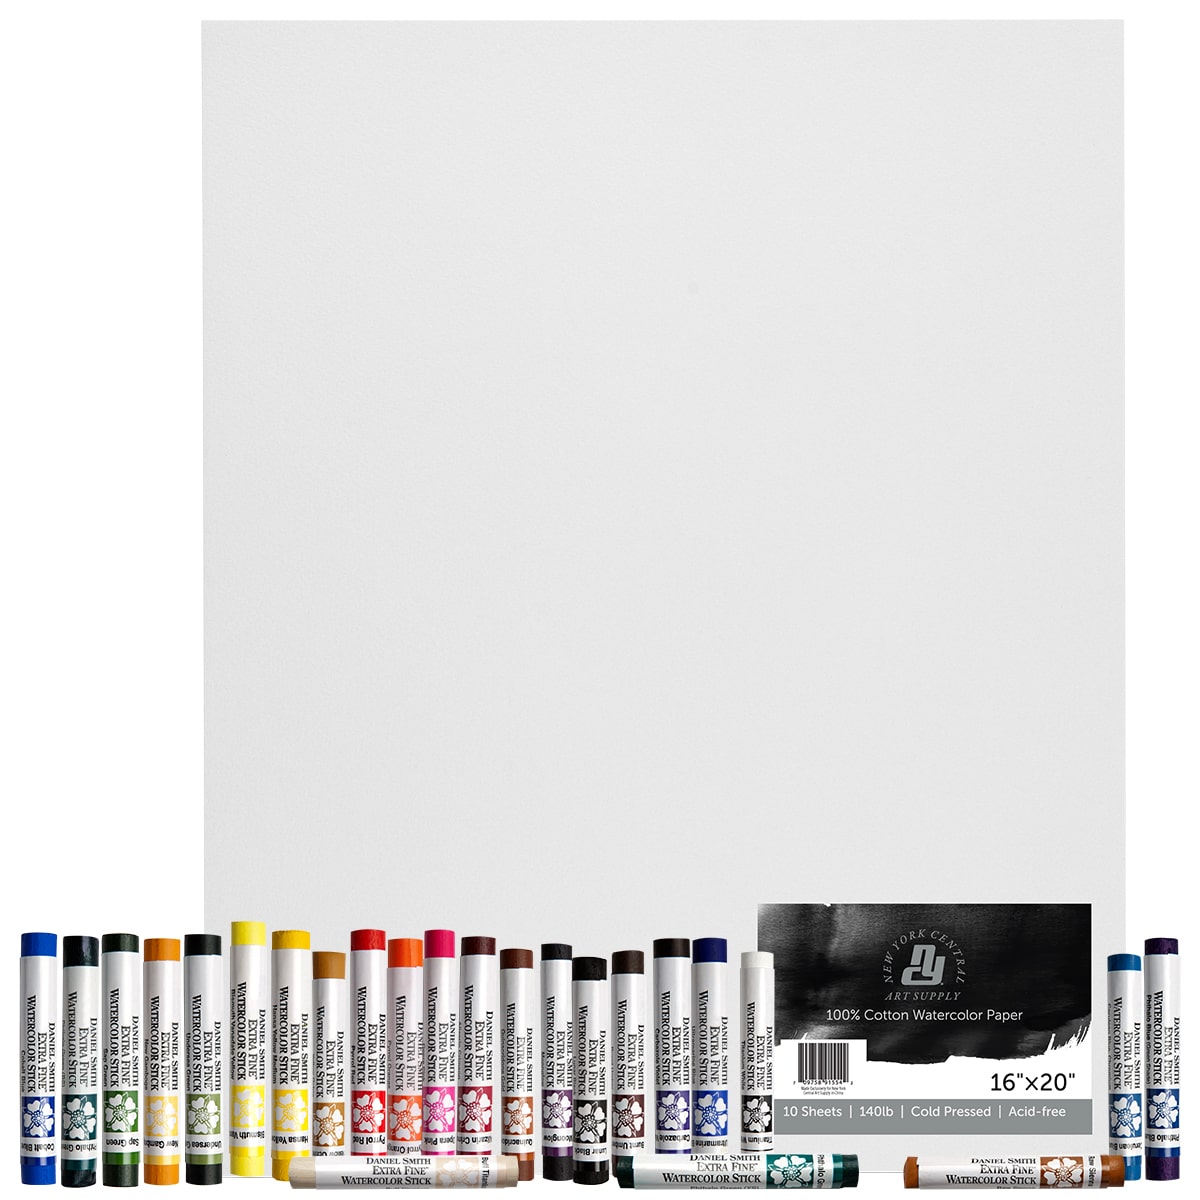 Marie's Master Quality Watercolor Set